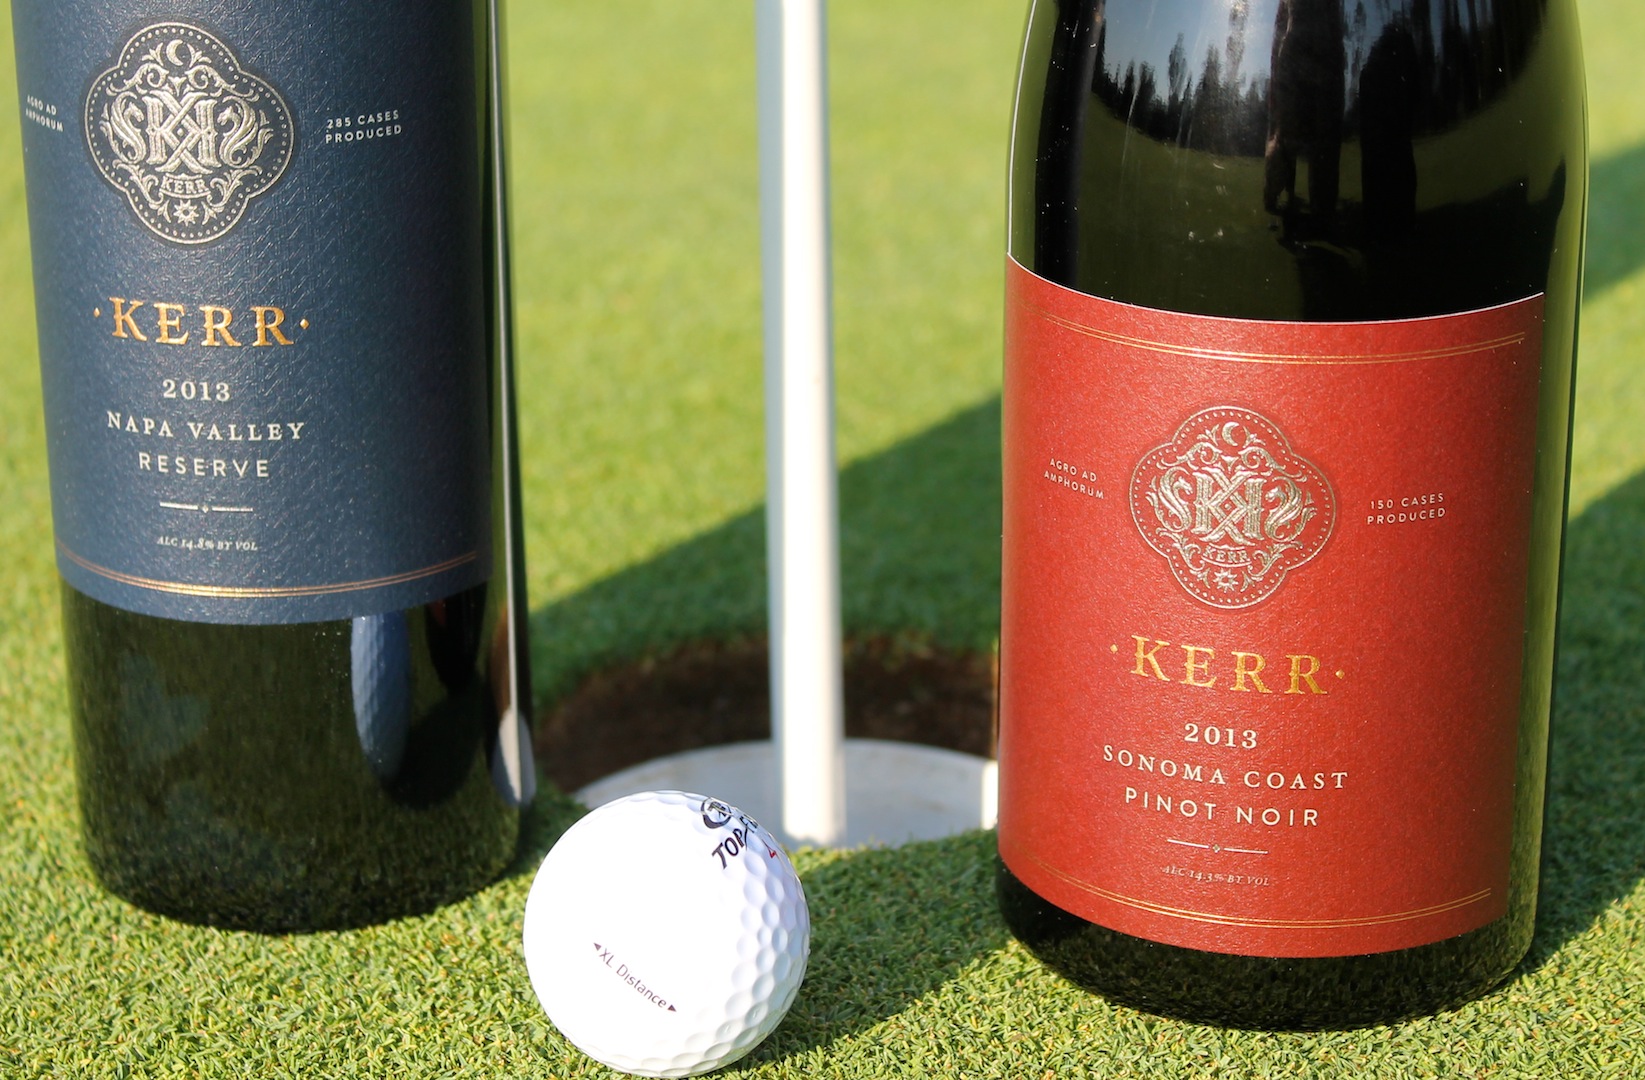 kerr wine image with golf ball